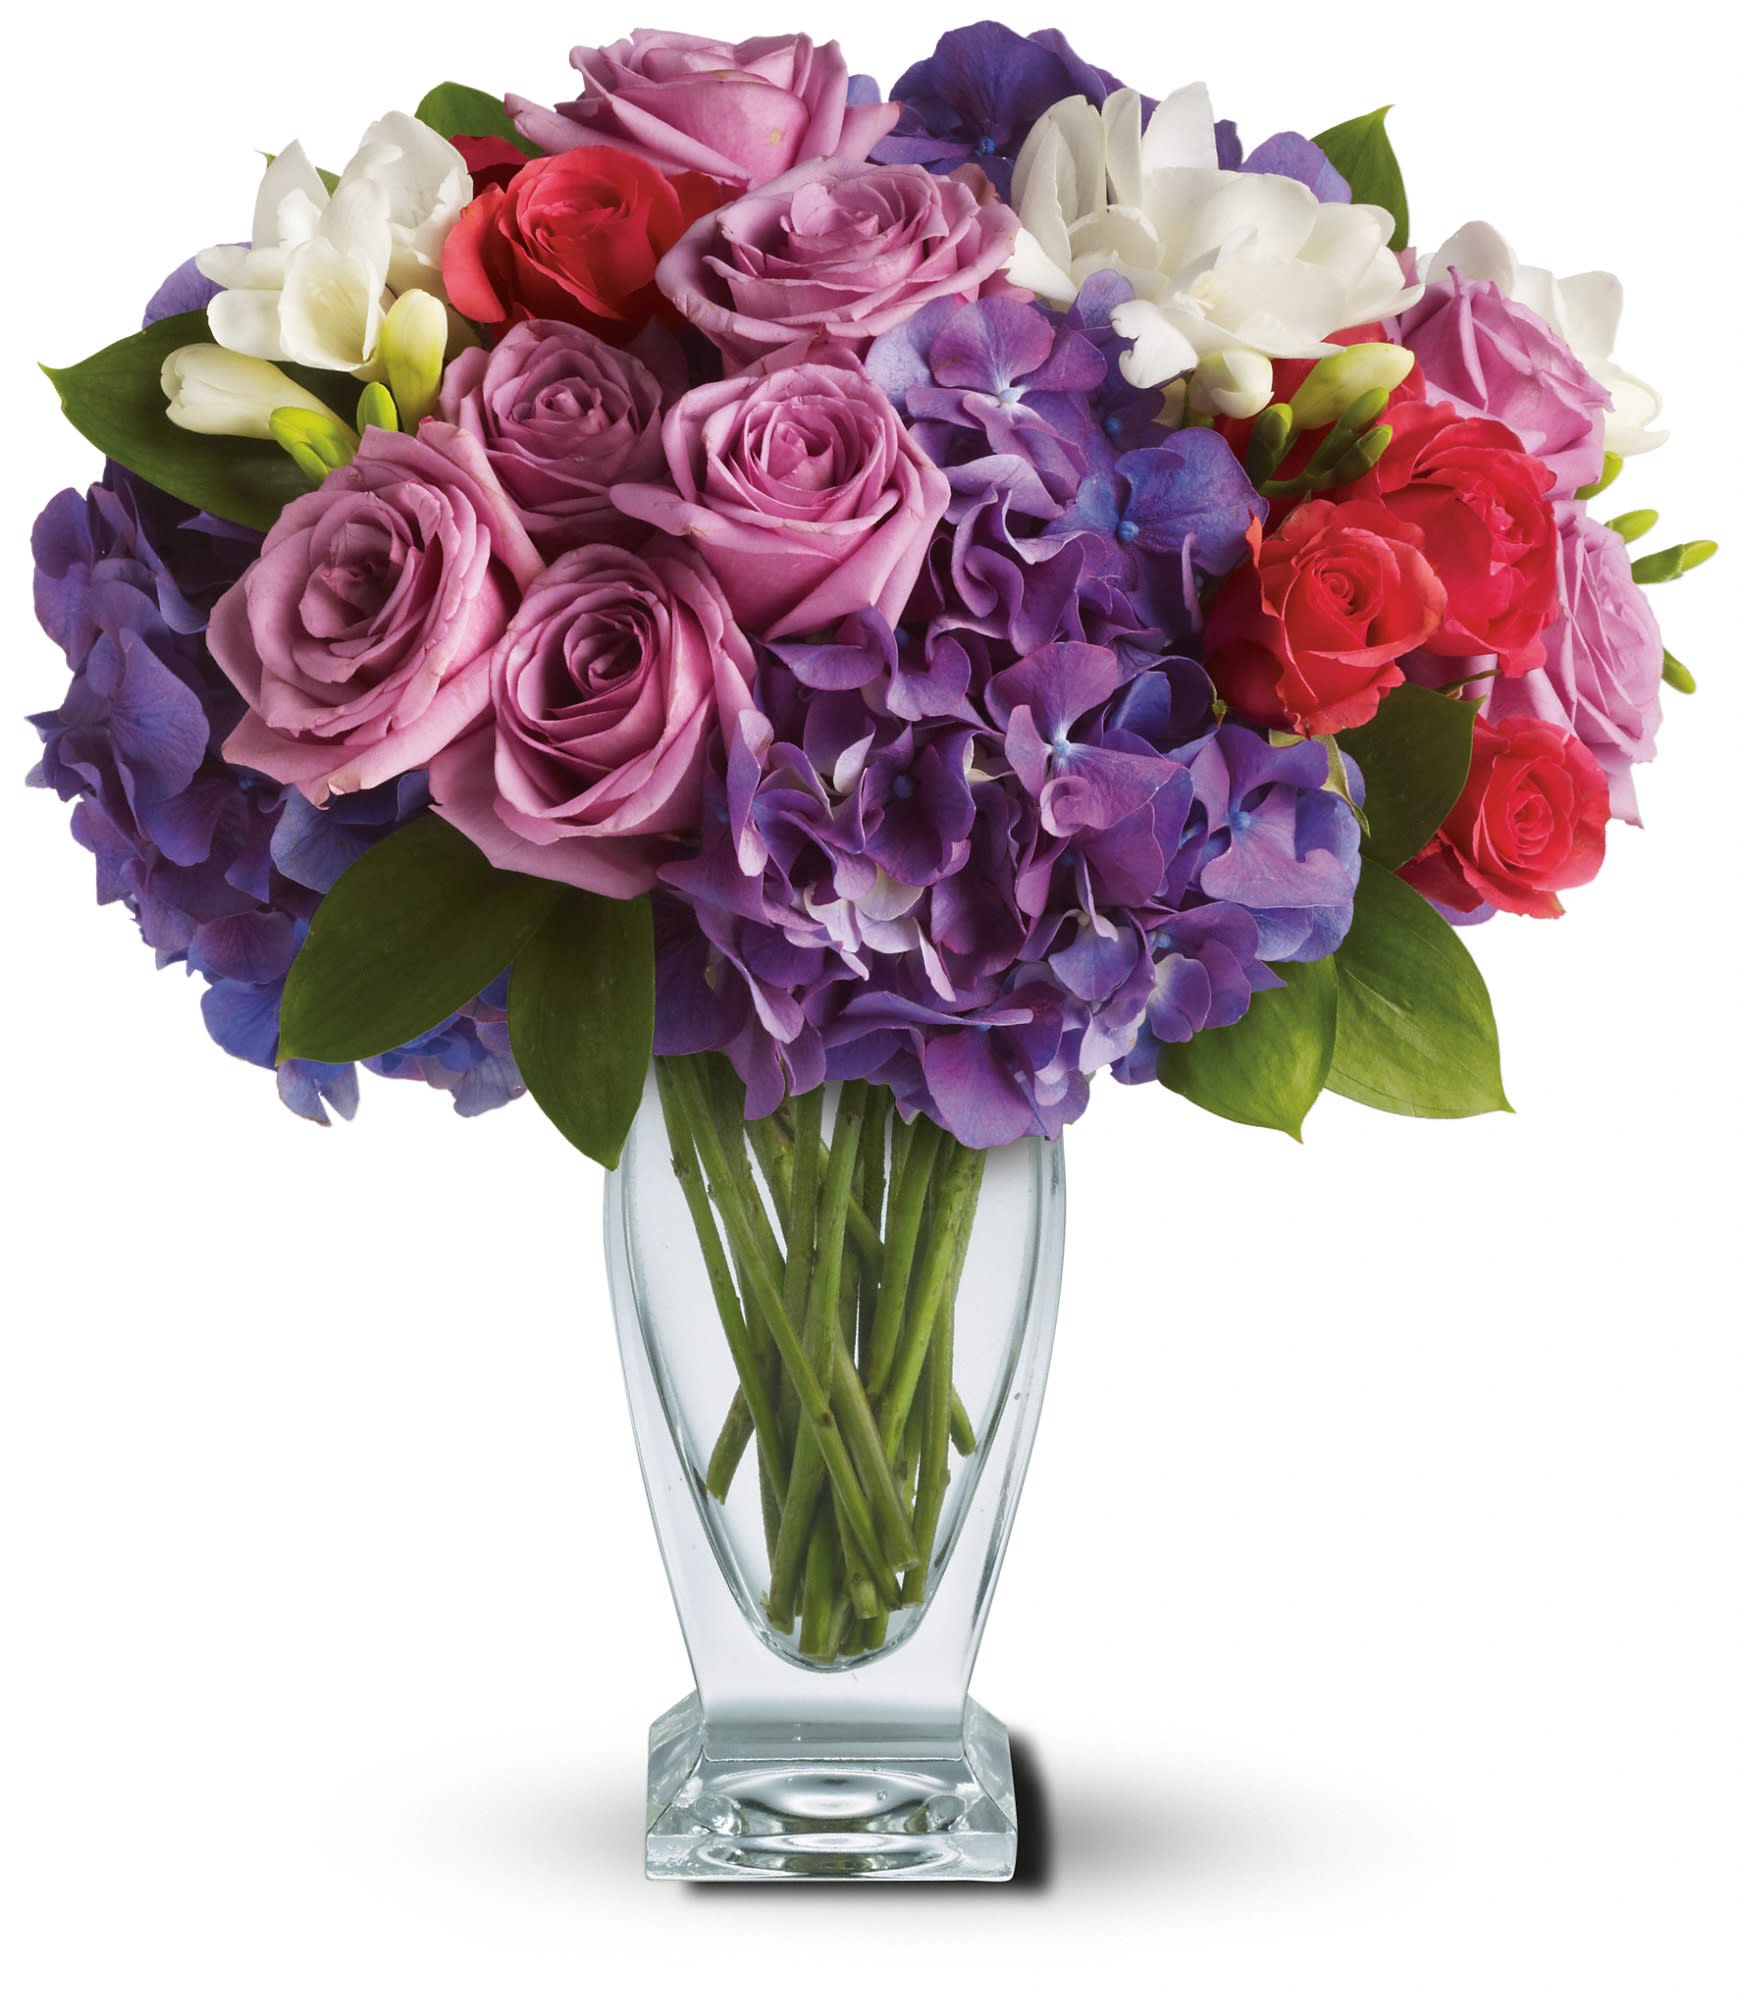 Teleflora's Rhapsody in Purple - A rhapsody of beauty is on stunning display in this arrangement. Gorgeous blossoms are beautifully arranged and delivered in a divine Couture Vase.  